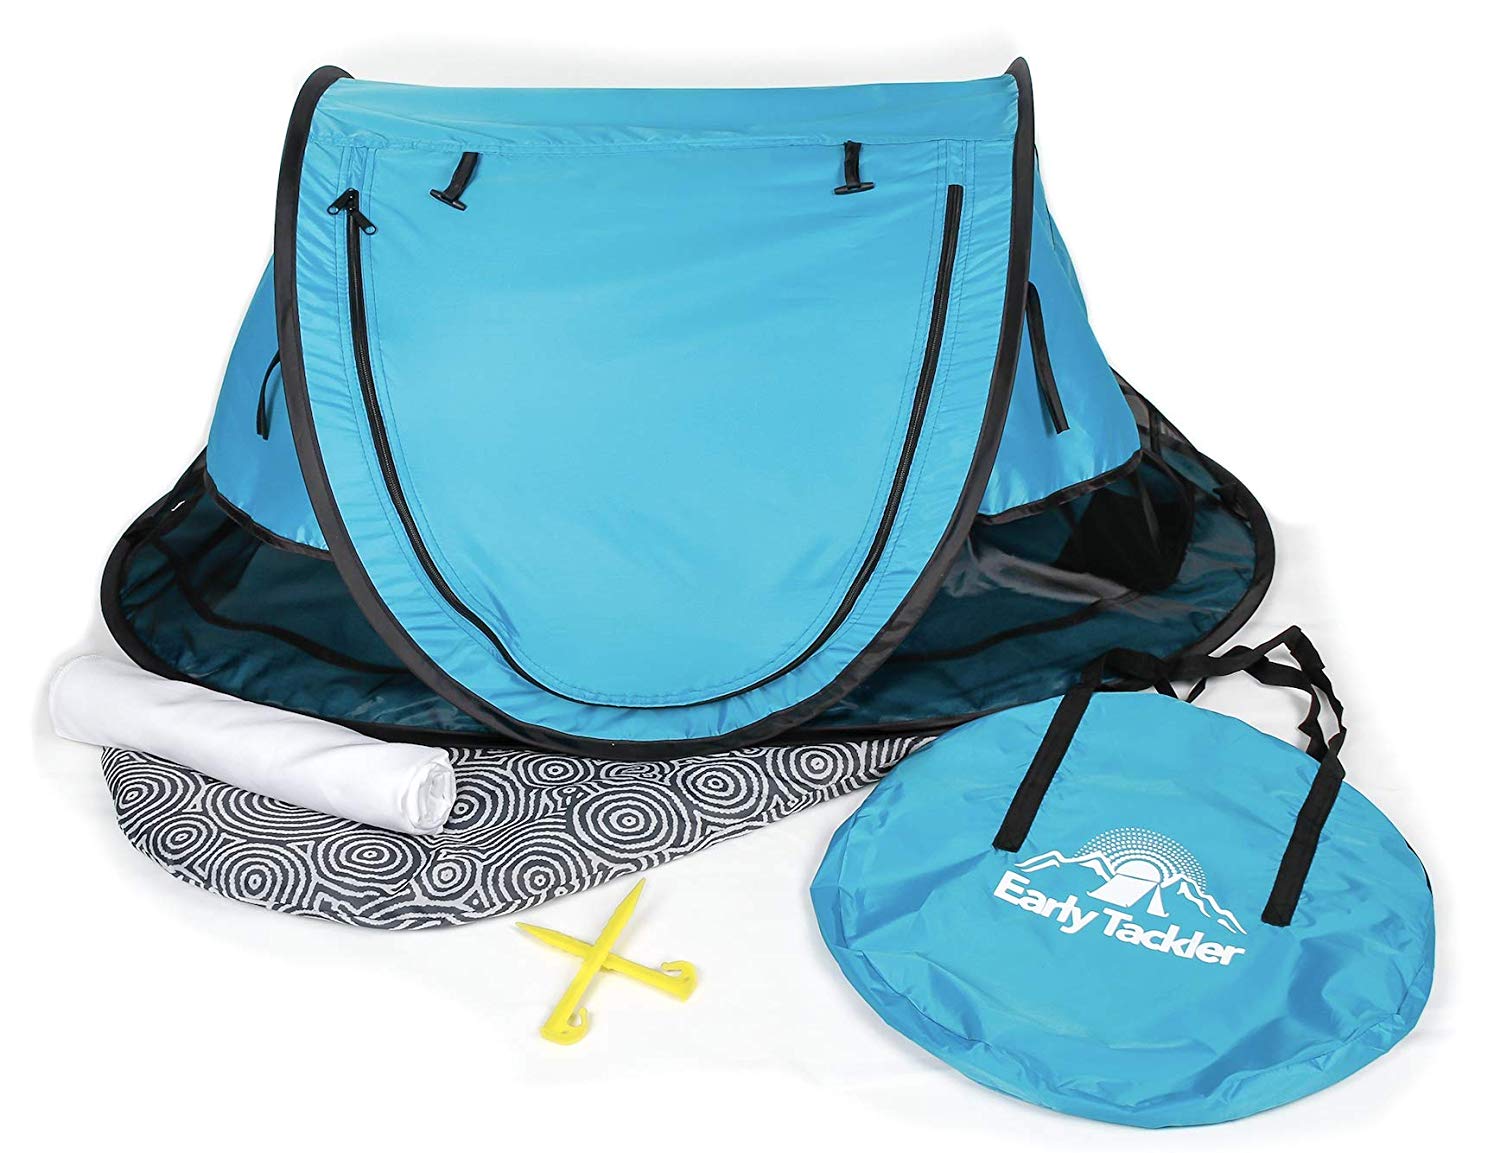 Portable Beach Pop Up Tent for Babies UPF 50+ Lightweight Outdoor Travel Bed with Sleeping Pad